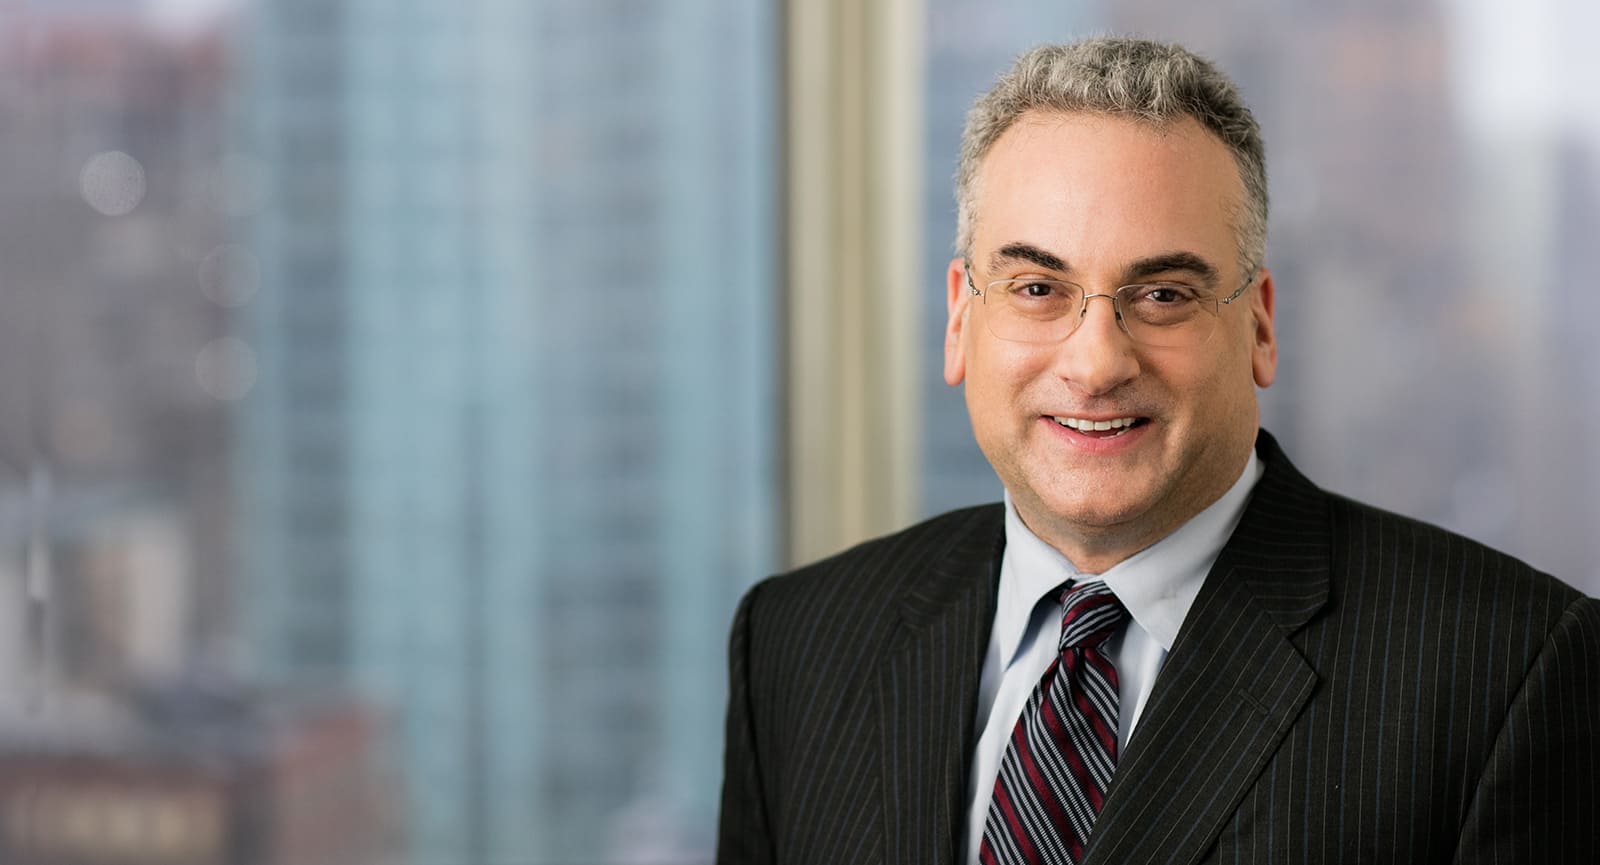 Jeffrey Berkowitz. Seasoned litigator with nearly 25 years in practice specializing in commercial, real estate, bankruptcy, product liability, and class action matters.